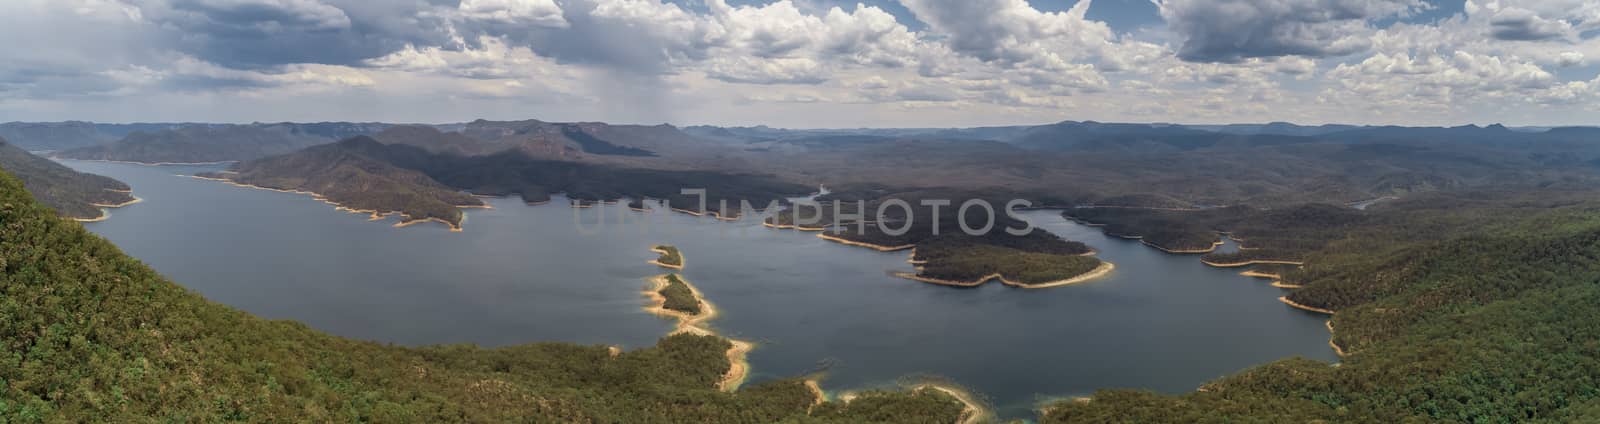 Sydney’s primary source of drinking water Lake Burragorang in The Blue Mountains in New South Wales, Australia